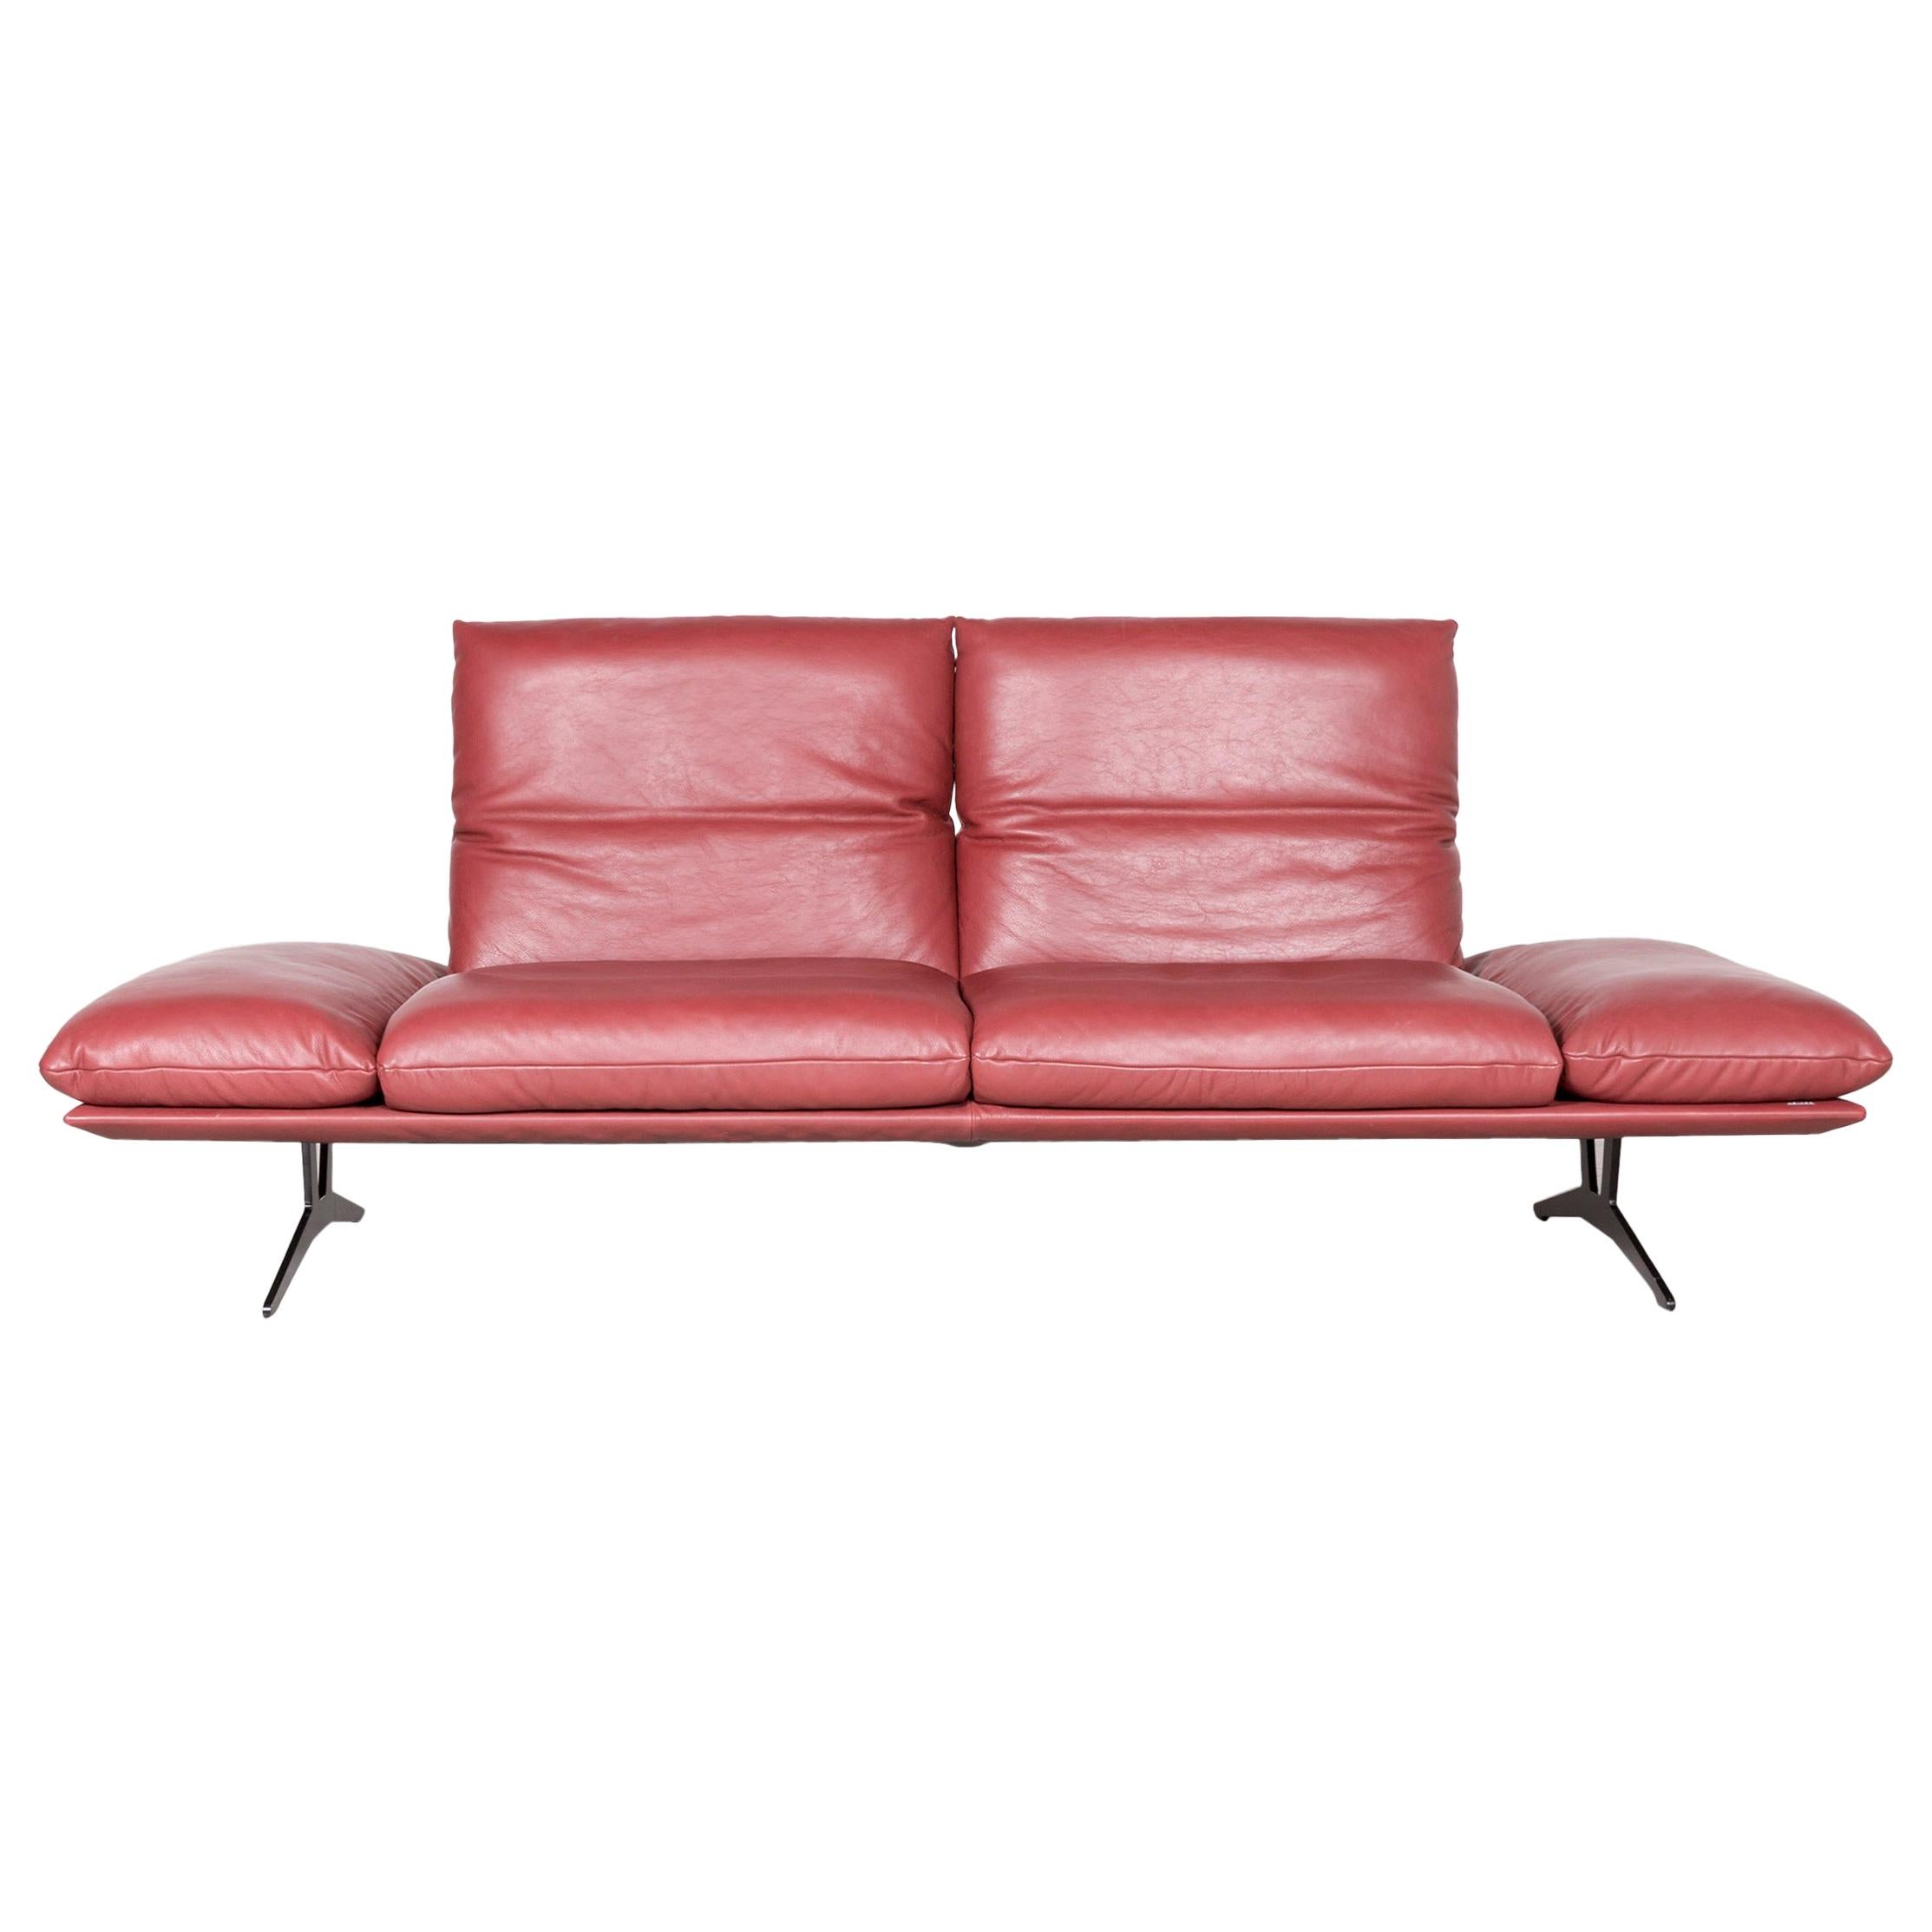 Koinor Francis Designer Leather Sofa Red Three-Seat Couch